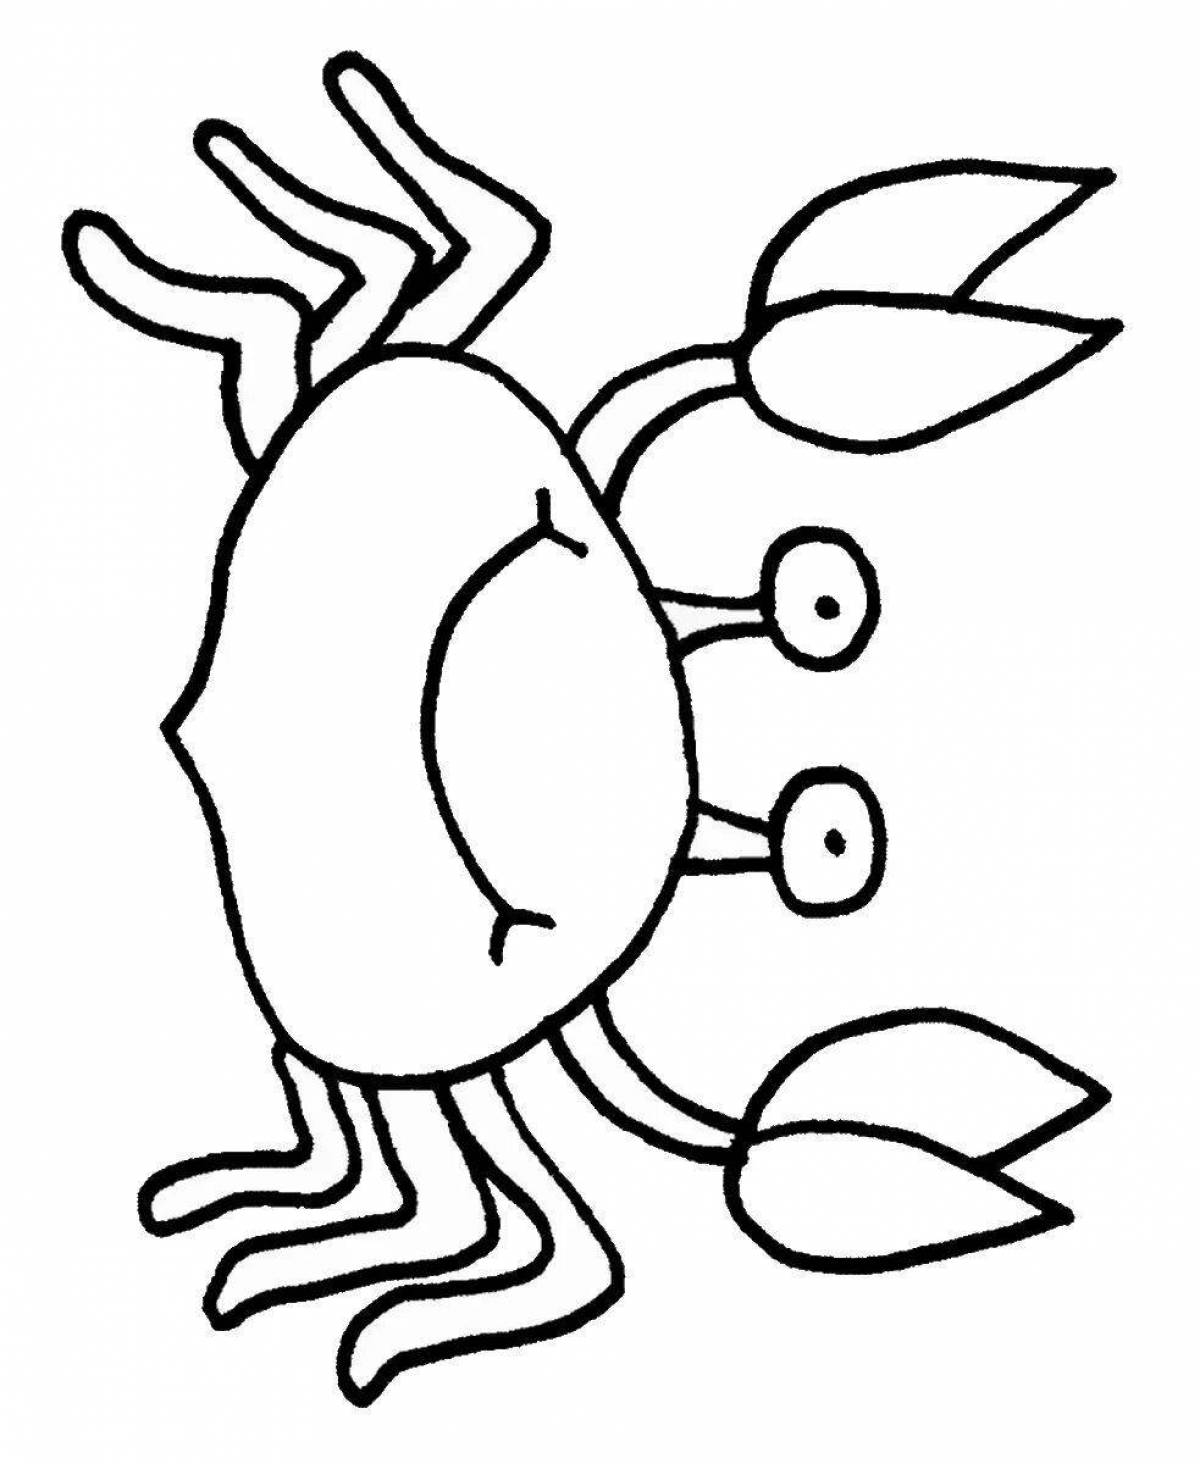 Creative crab coloring for kids